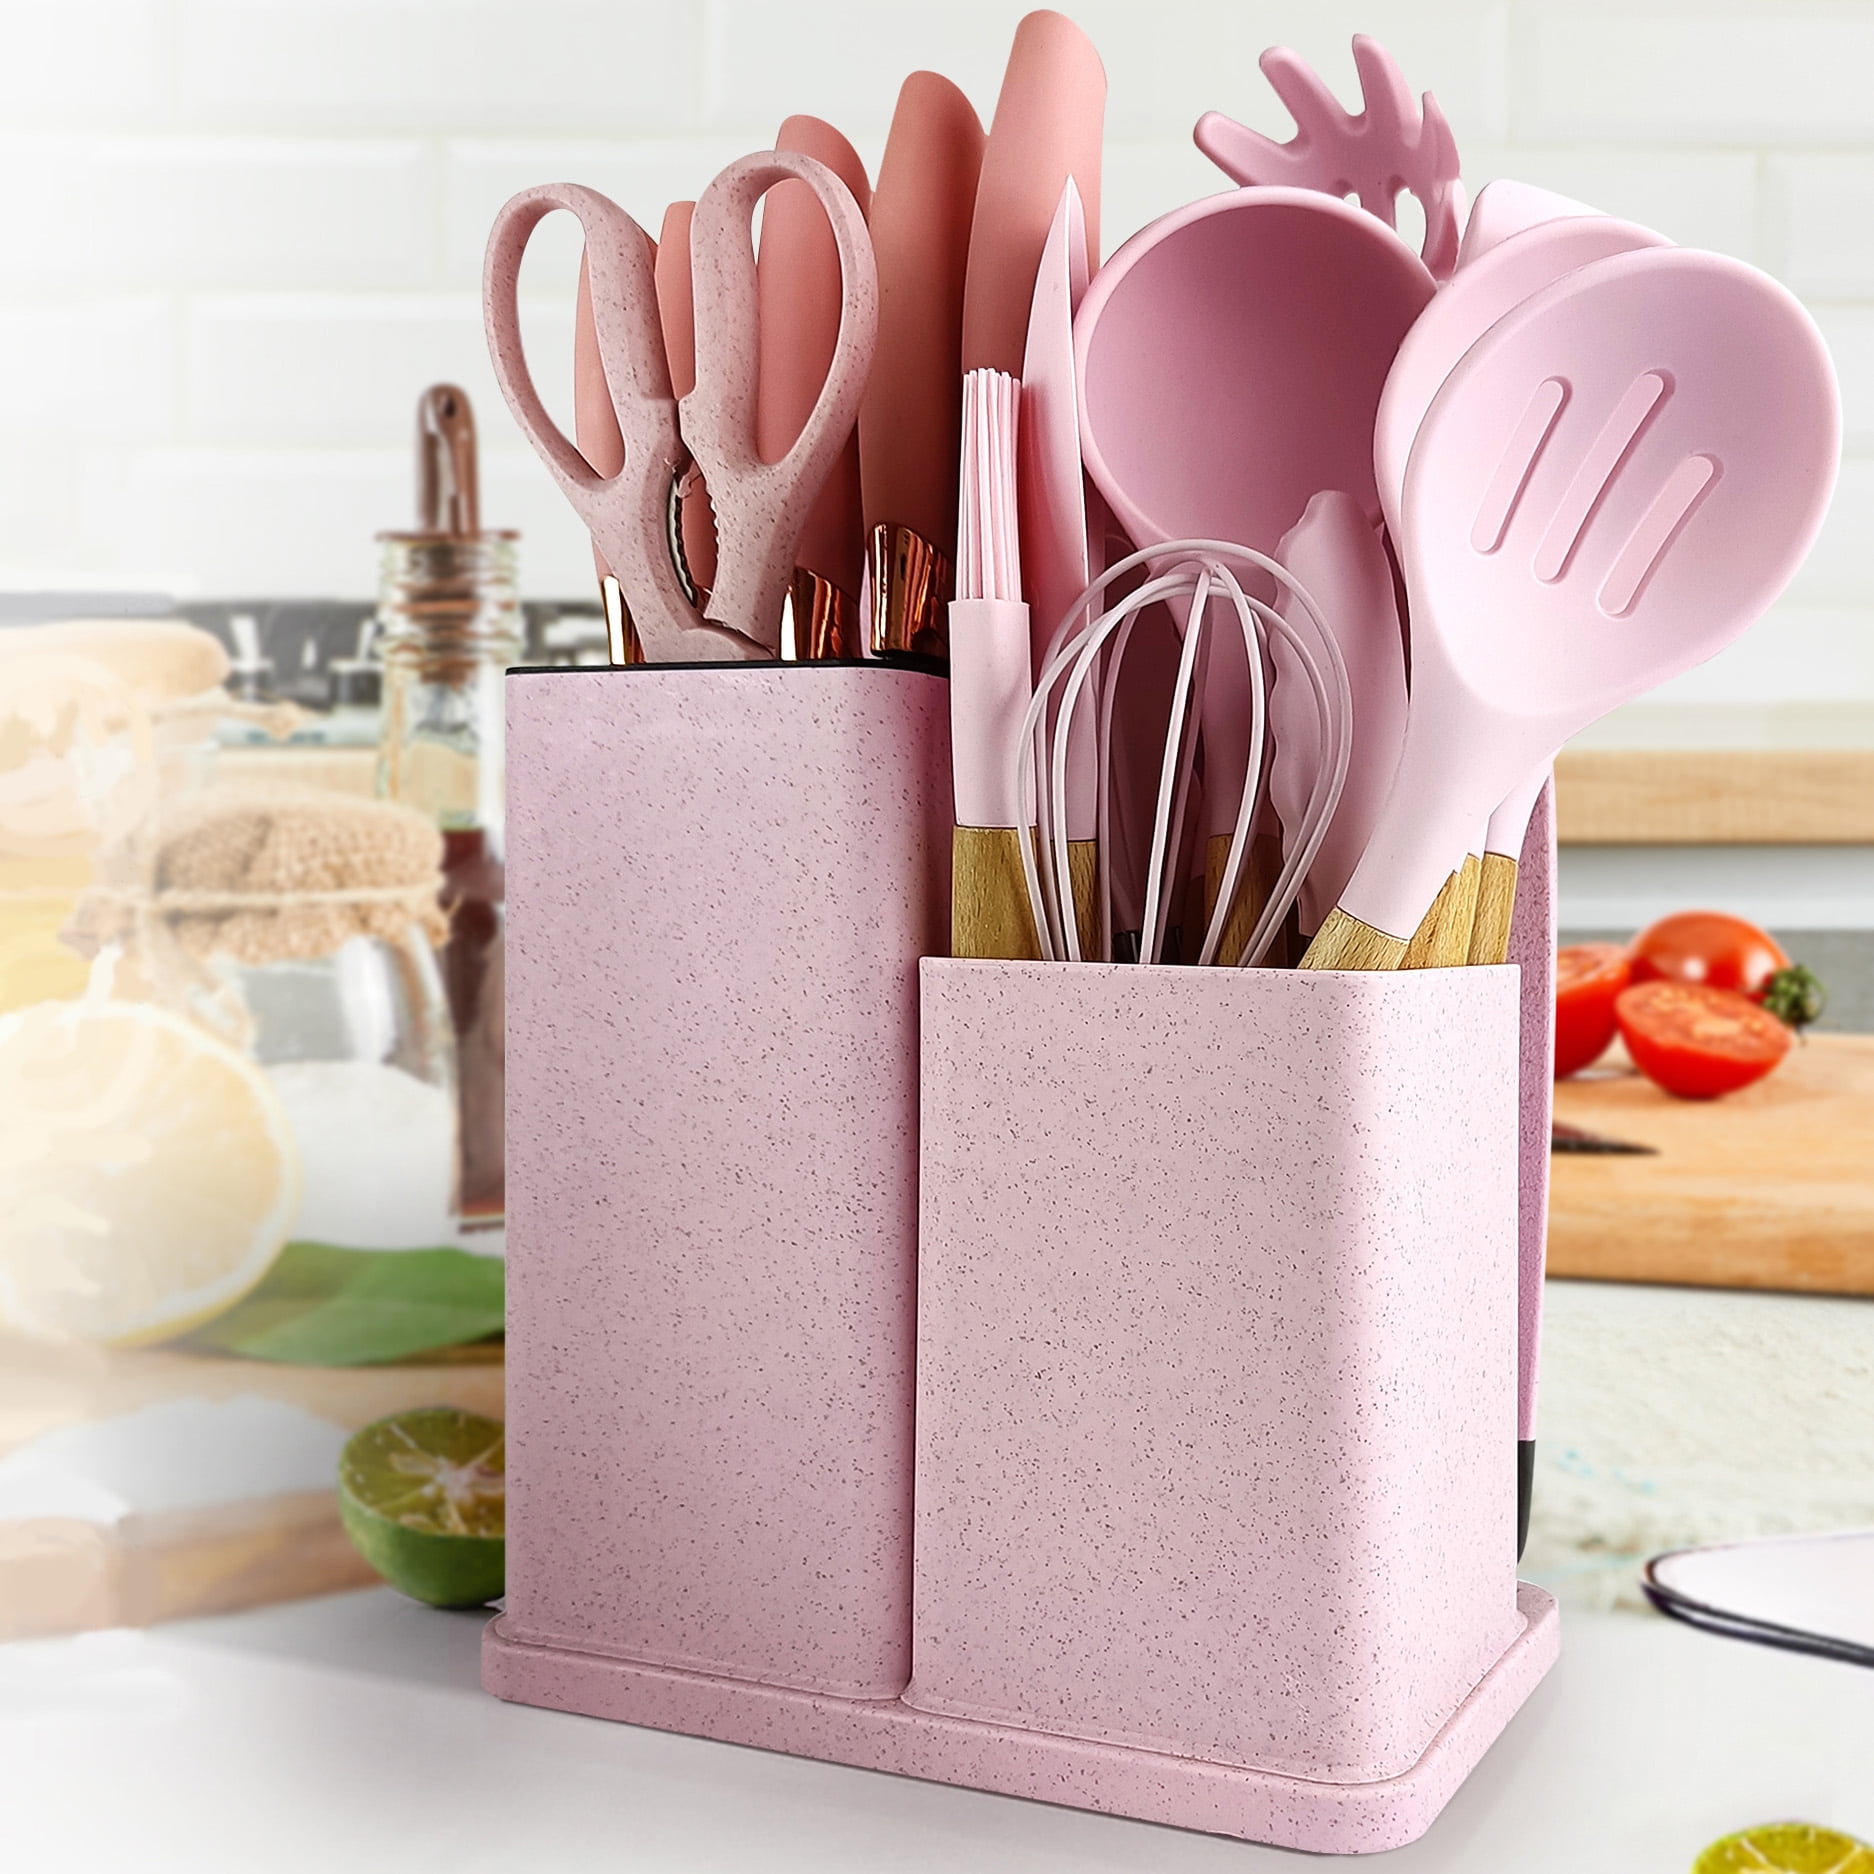 Cooking Utensils Set - Non-stick Silicone Kitchen Tools, Pink